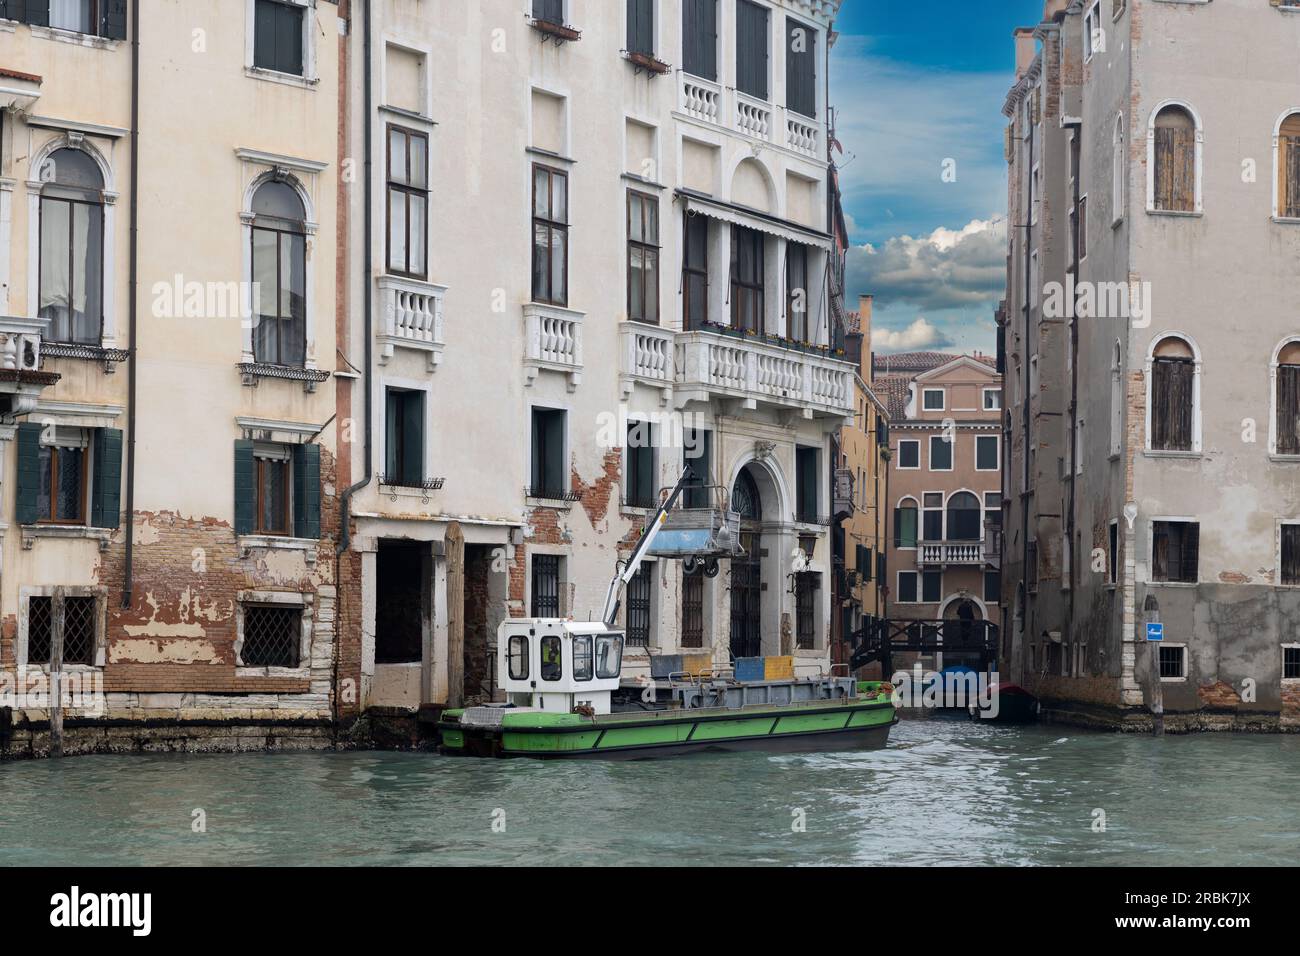 Trash collection at Venice. Buildings on Grand Canal, with waste collection boat. Stock Photo